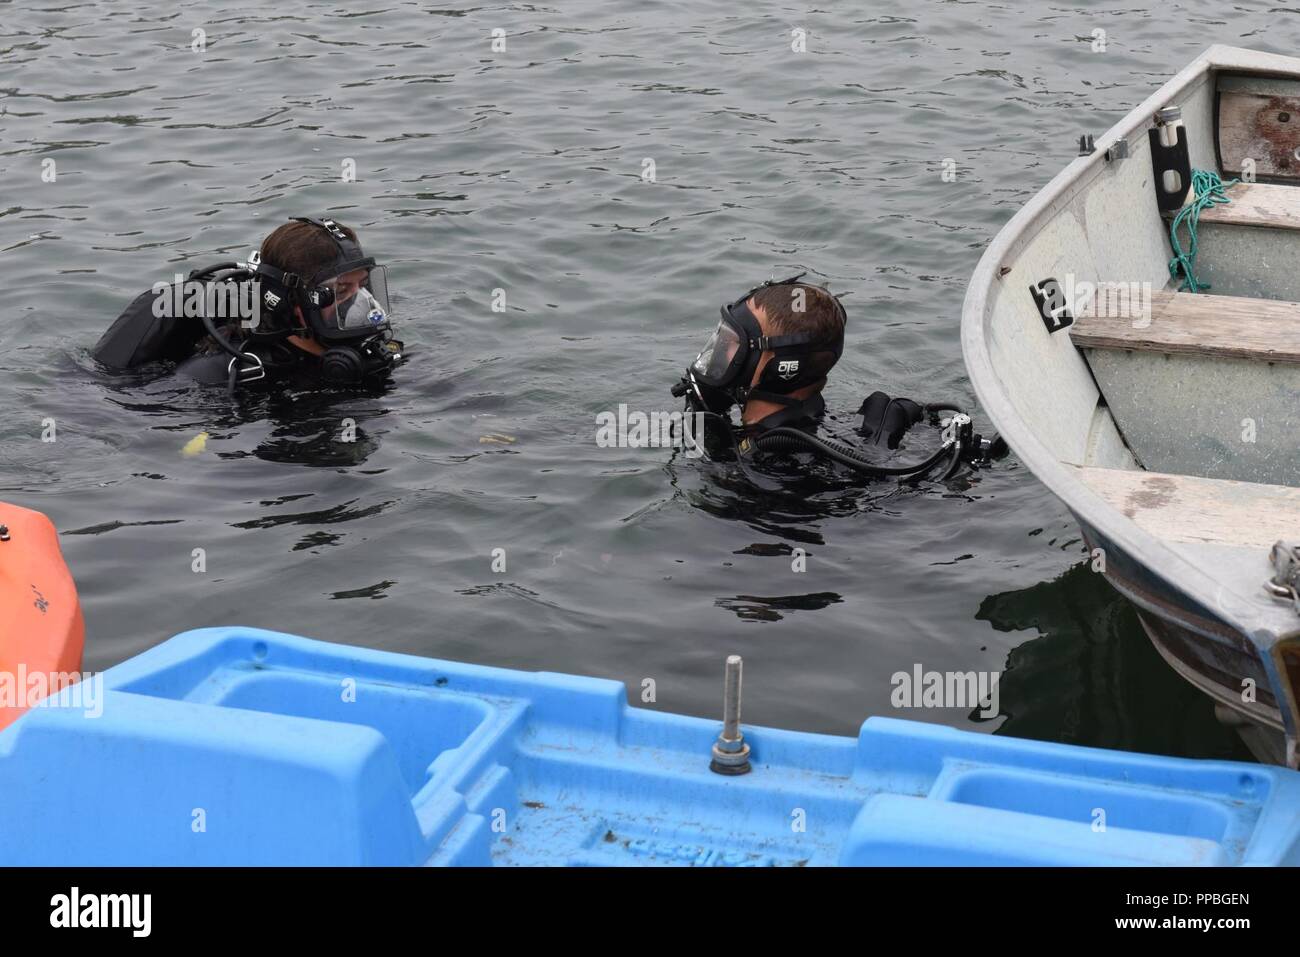 Petty Officer 2nd Class Monique Gilbreath and Petty Officer 2nd Class Brian Lehuede, divers from the Coast Guard Regional Dive Locker West, Maritime Security Response Team West, prepare to search for debris in the San Diego Bay Aug. 25, 2018. The dive team was participating in Operation Clean Sweep 2018, a community cleanup effort along the San Diego Bay. Stock Photo